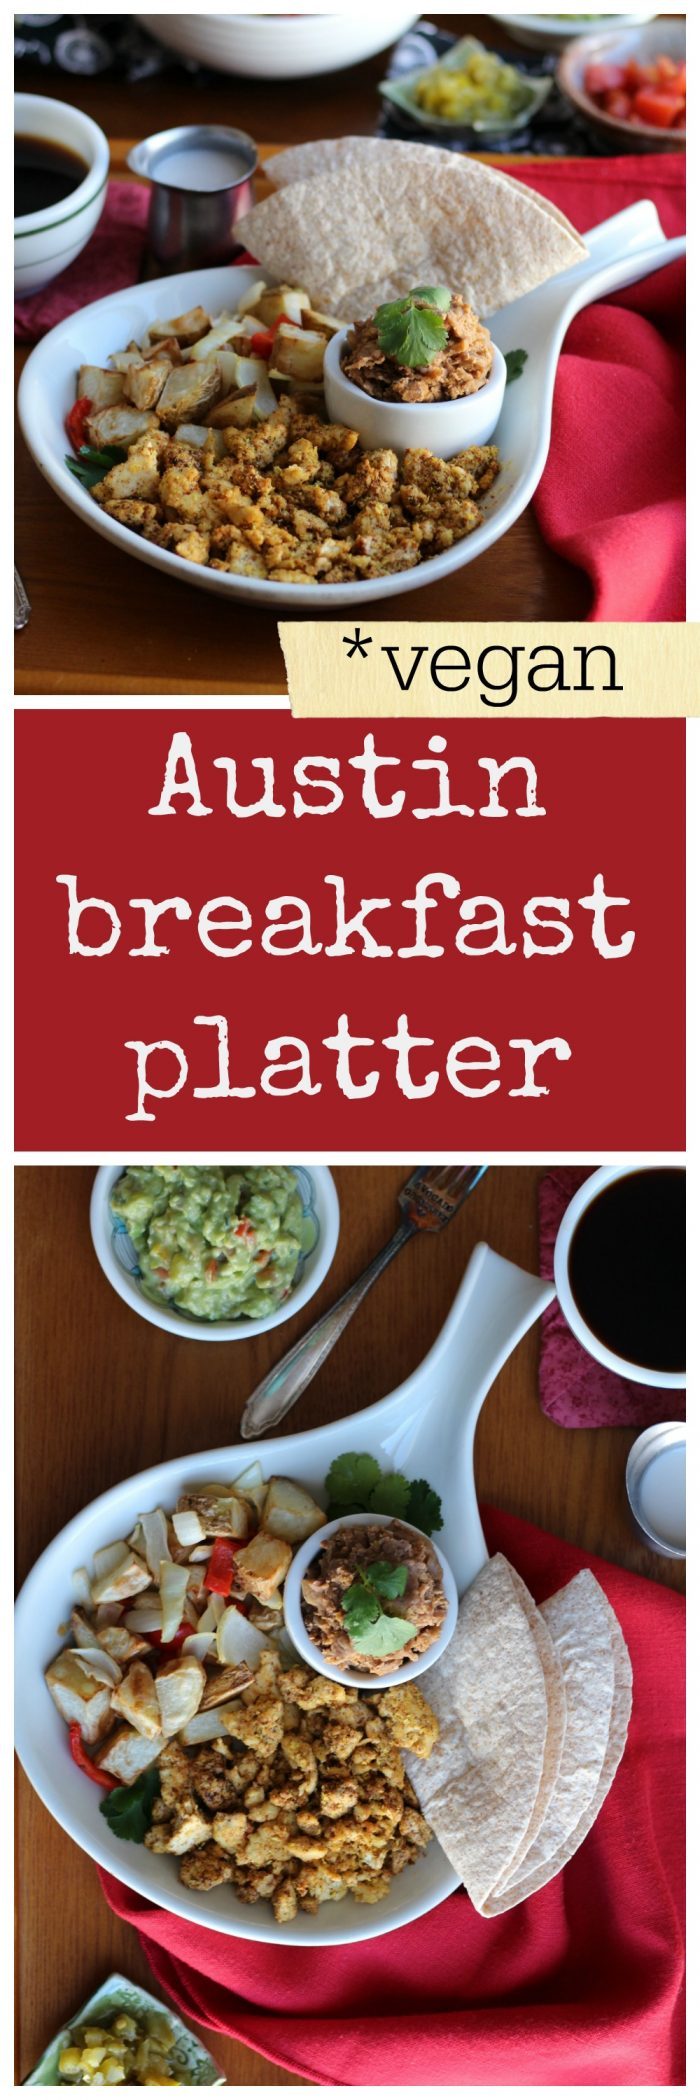 This hearty, vegan Austin breakfast is chock-full of flavor. It's packed with spicy scrambled tofu, creamy refried beans, potatoes, and guacamole. Savory breakfast lovers rejoice! | cadryskitchen.com